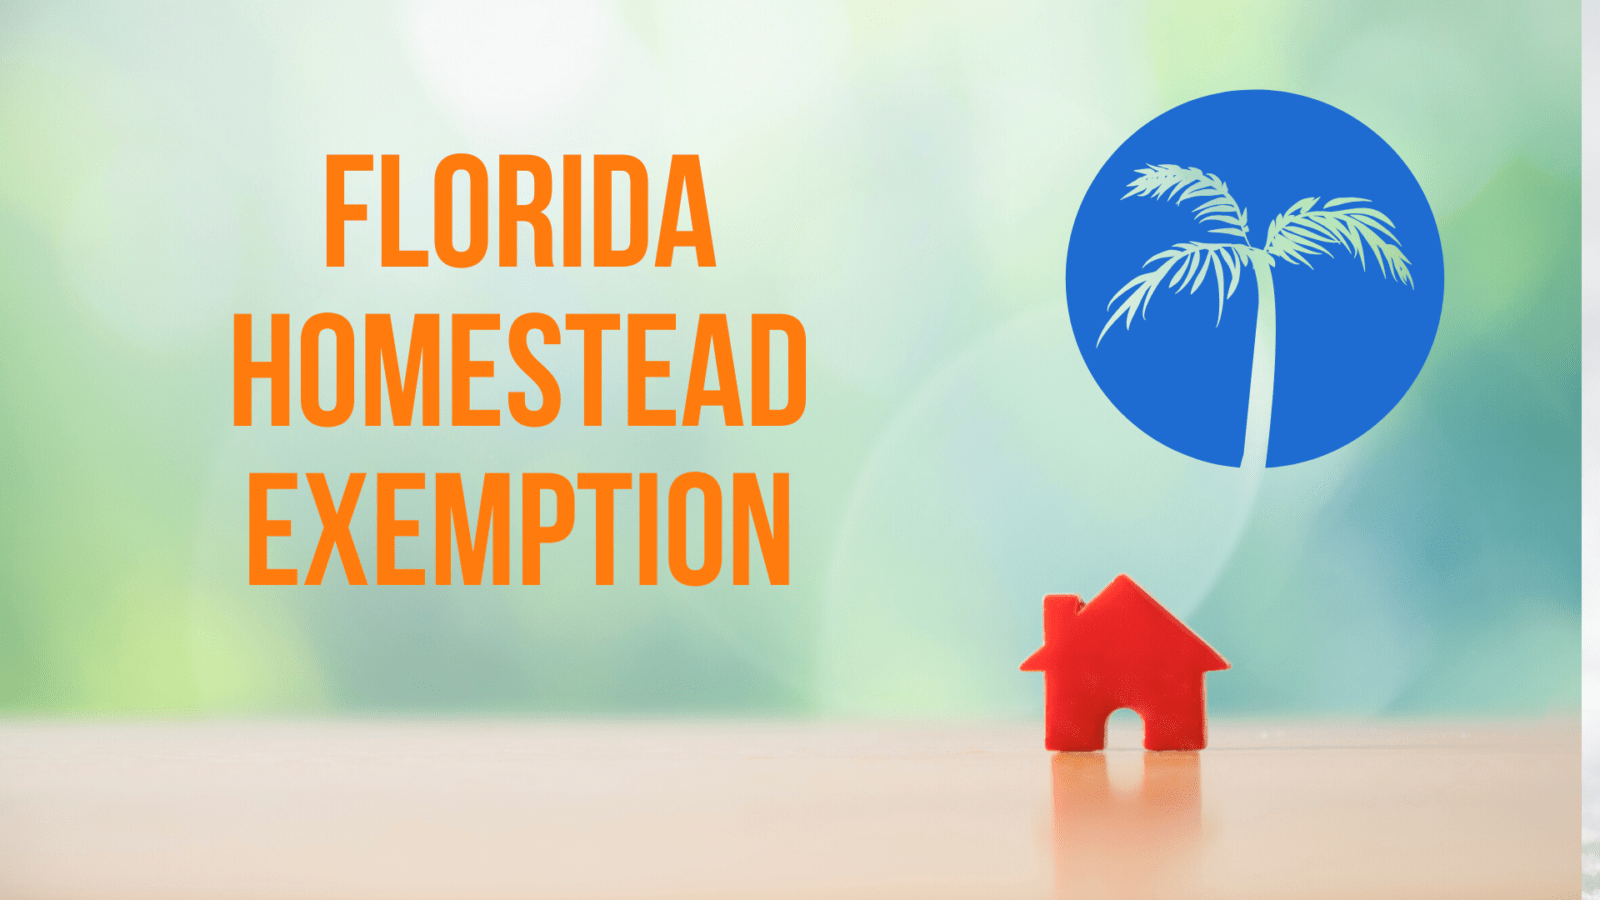 apply-for-homestead-exemption-in-florida-tutorial-pics